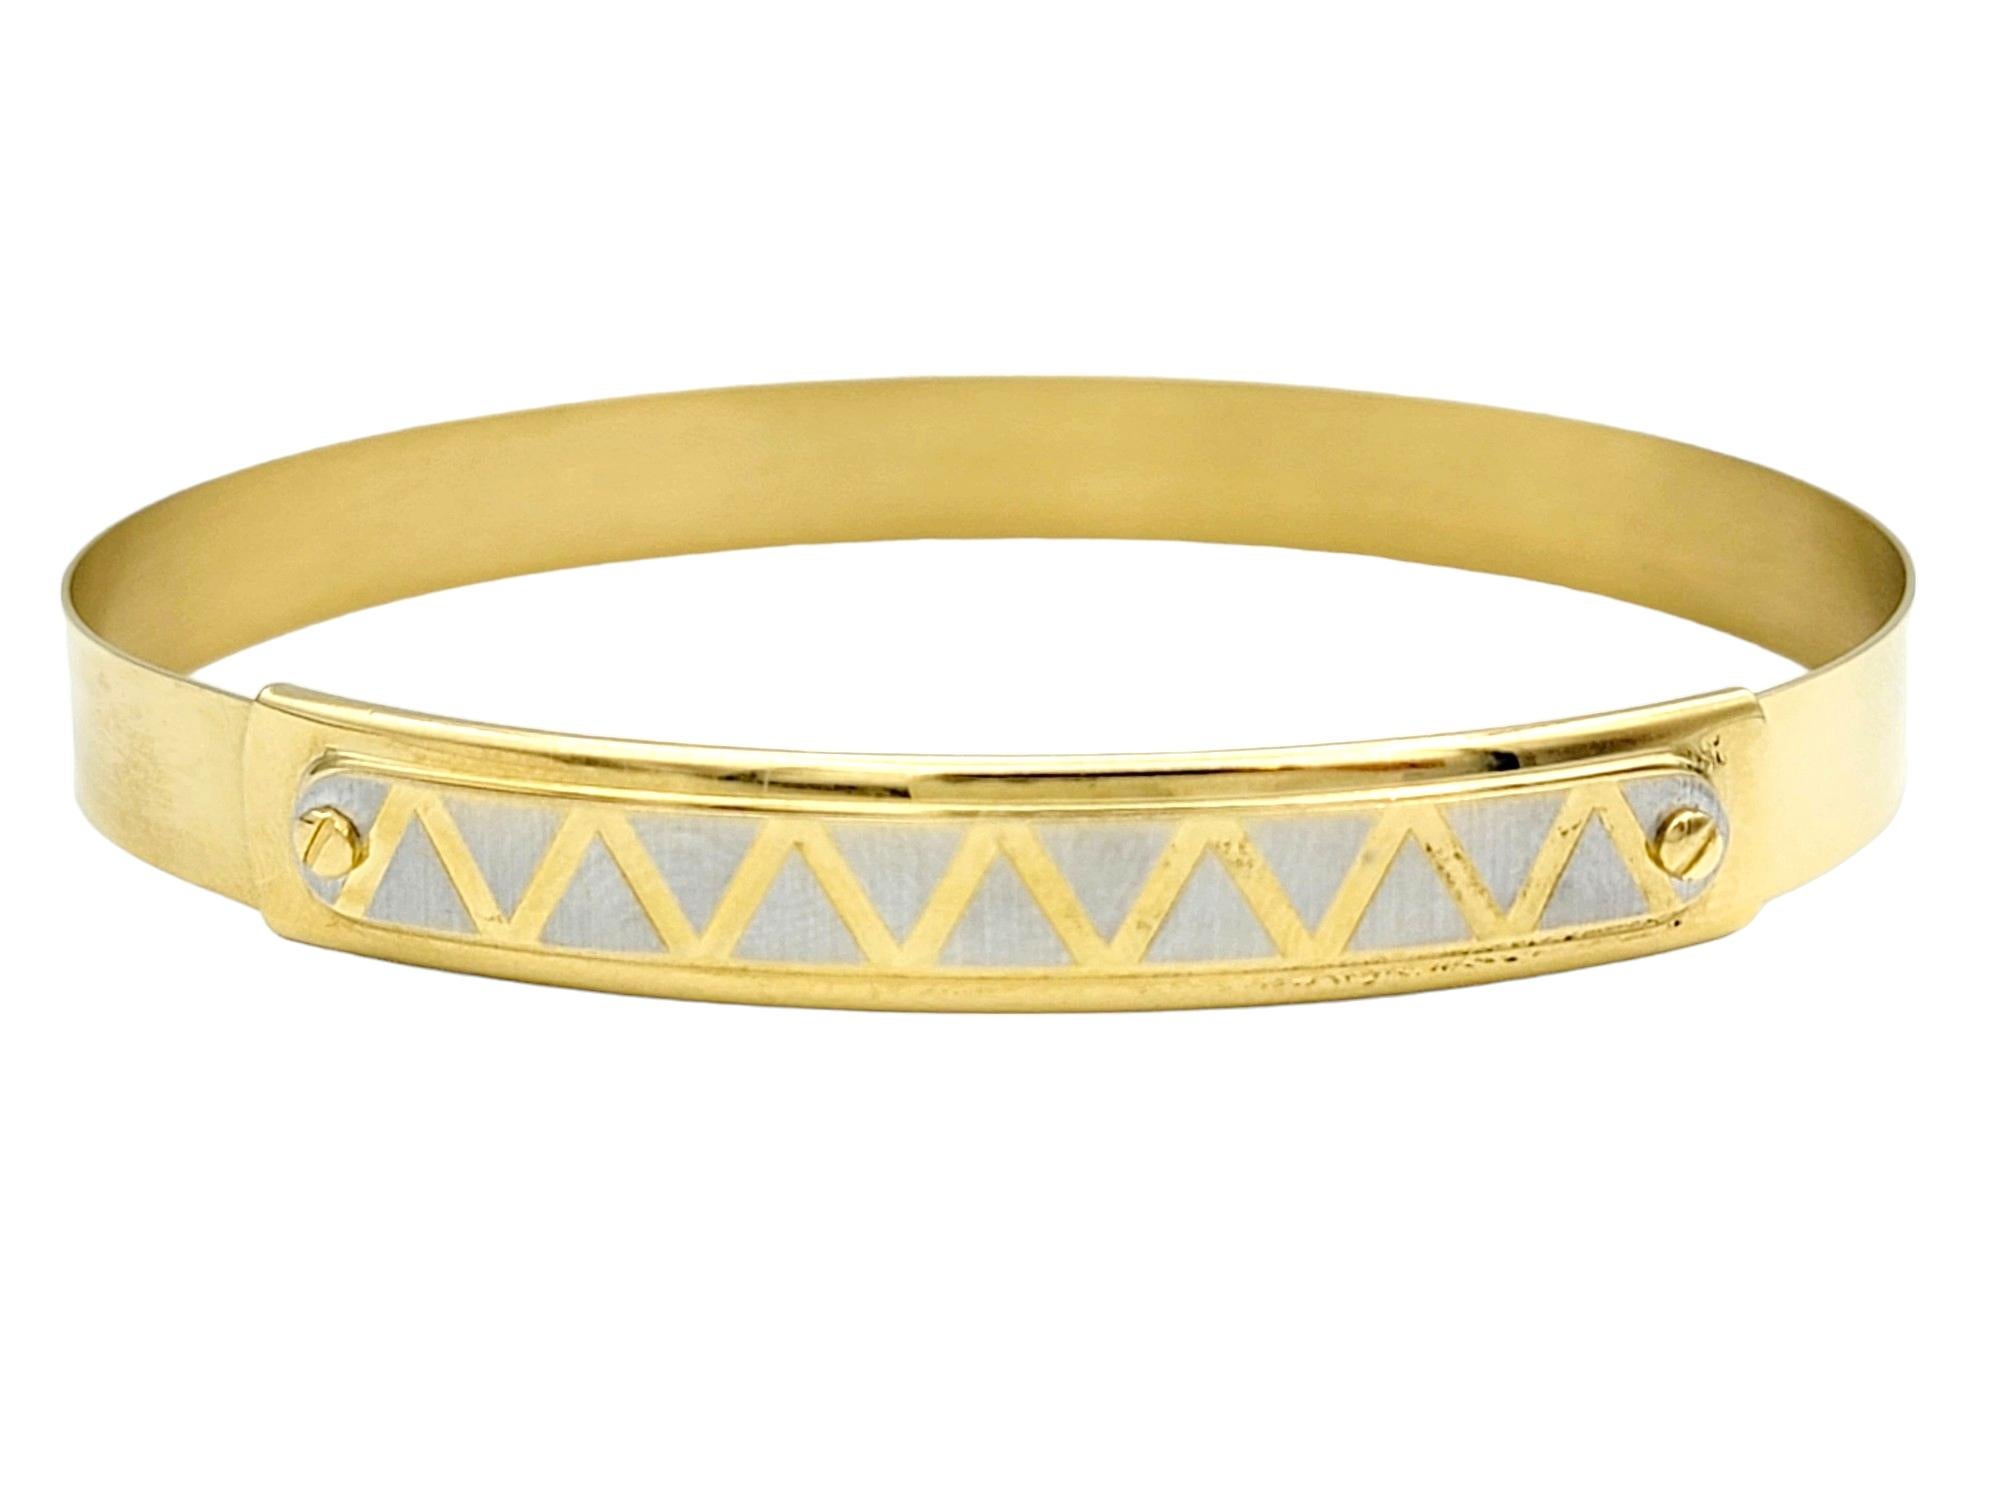 This enchanting bangle bracelet, a creation by Ricciolo d'Oro, epitomizes elegance and versatility in fine jewelry. Meticulously crafted from opulent 18 karat gold, the bracelet boasts a slender and adjustable design, ensuring a perfect fit through